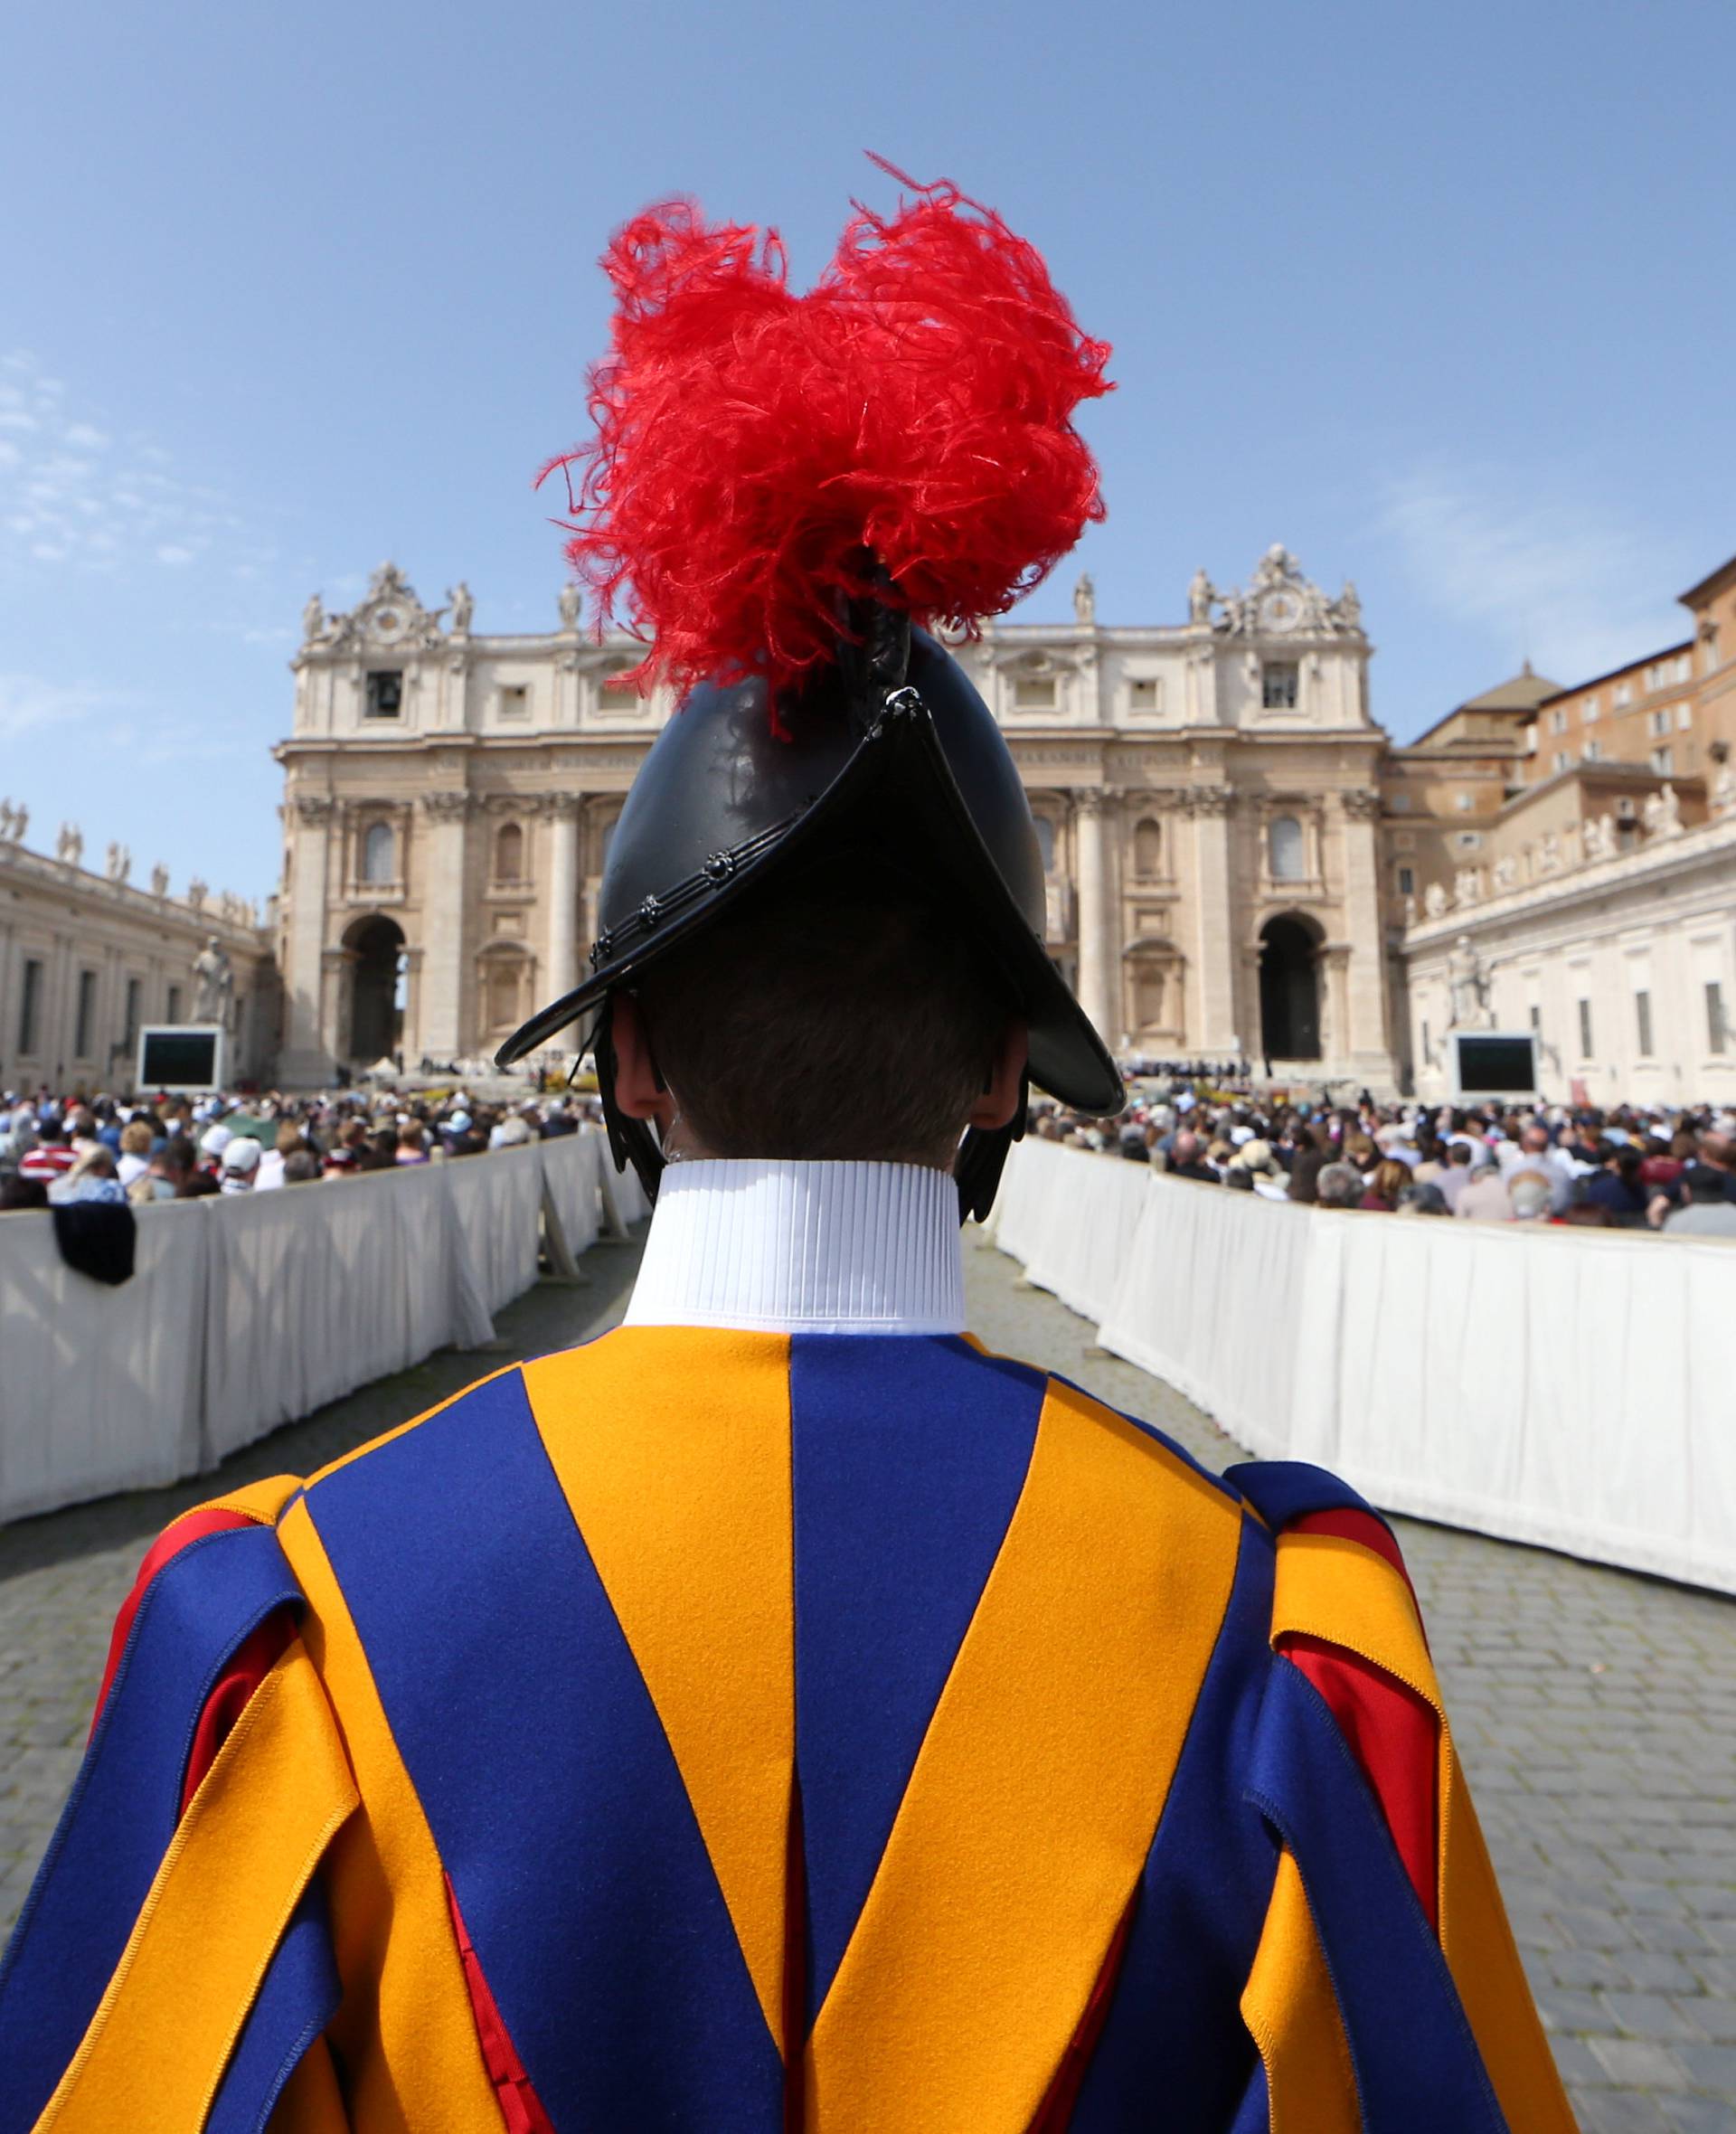 A Swiss guard stands in front of Saint Peter's Basilica during a Holy Mass to mark the feast of Divine Mercy at the Vatican